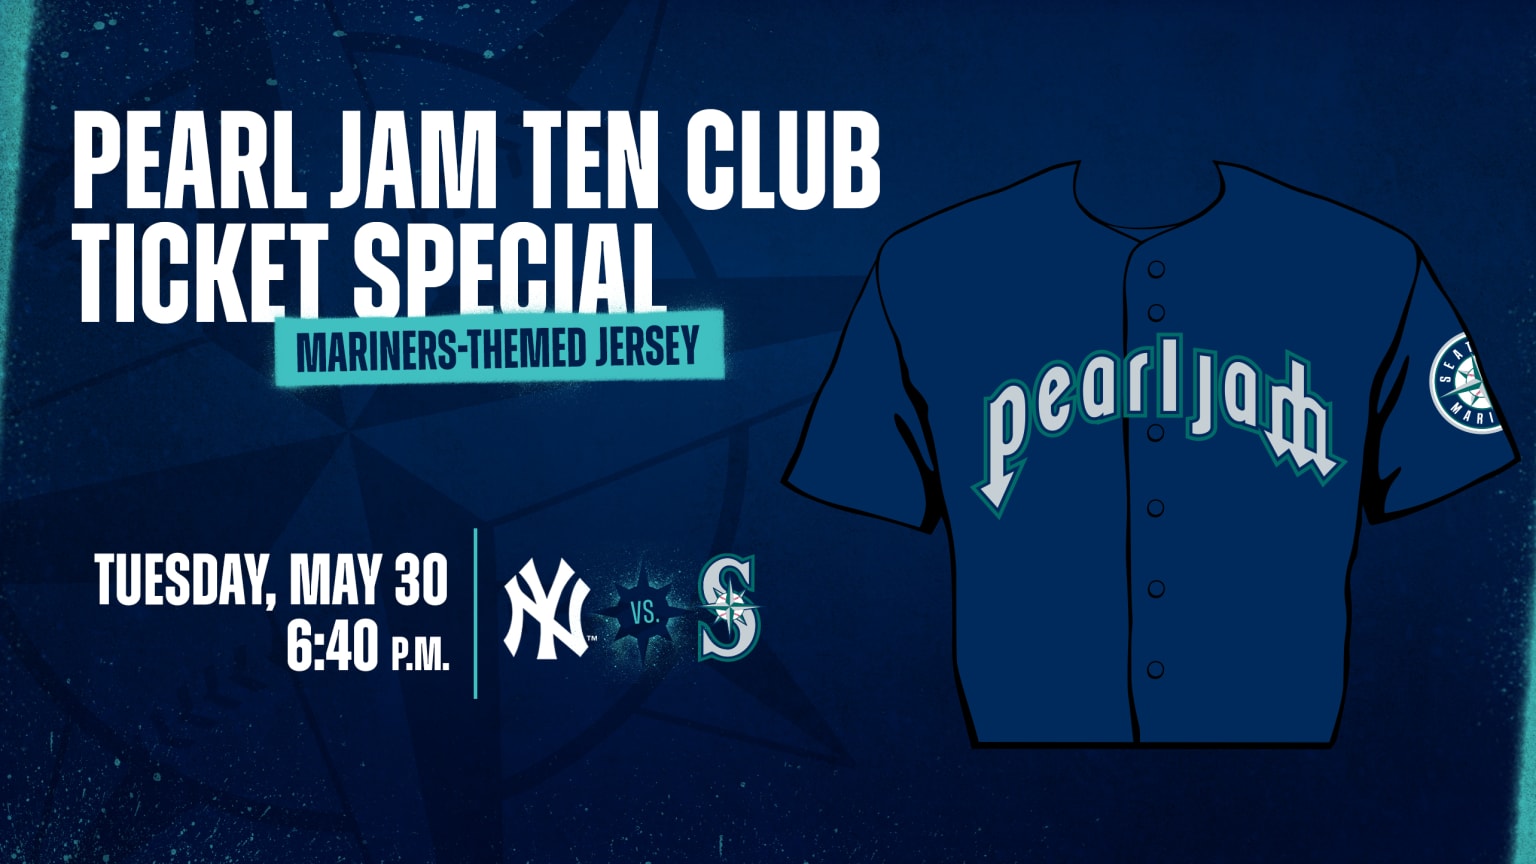 X \ Seattle Mariners على X: LAST CALL! Join us for Pearl Jam Fireworks  Night and make the night even better by getting in on our Ticket Special  that includes this one-of-a-kind